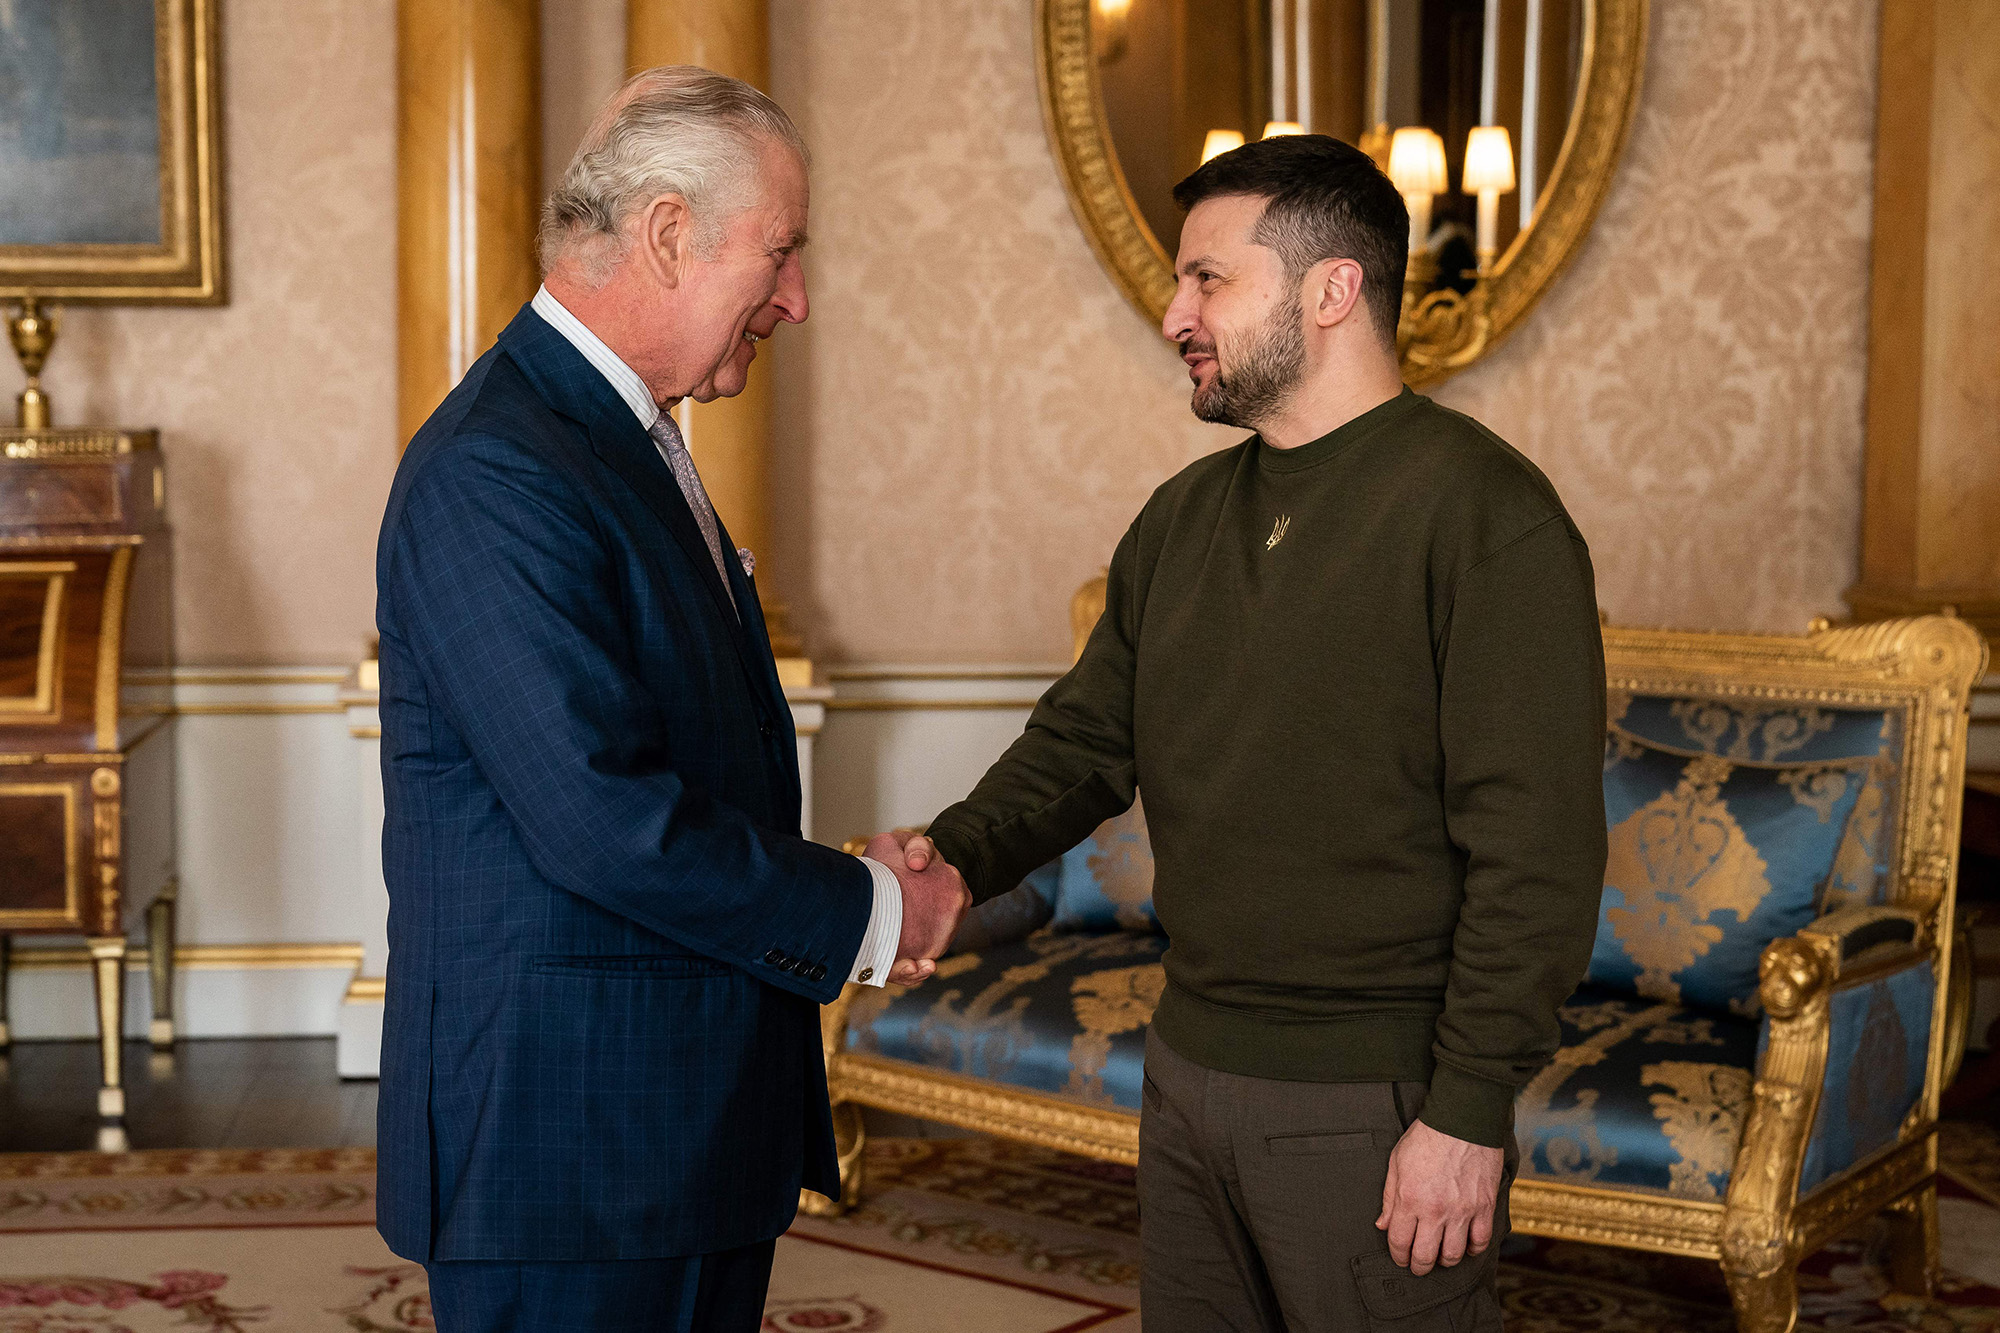 King Charles III, left, shakes hands with Ukraine's President Volodymyr Zelensky as he welcomes him at Buckingham Palace, London, England, on February 8.